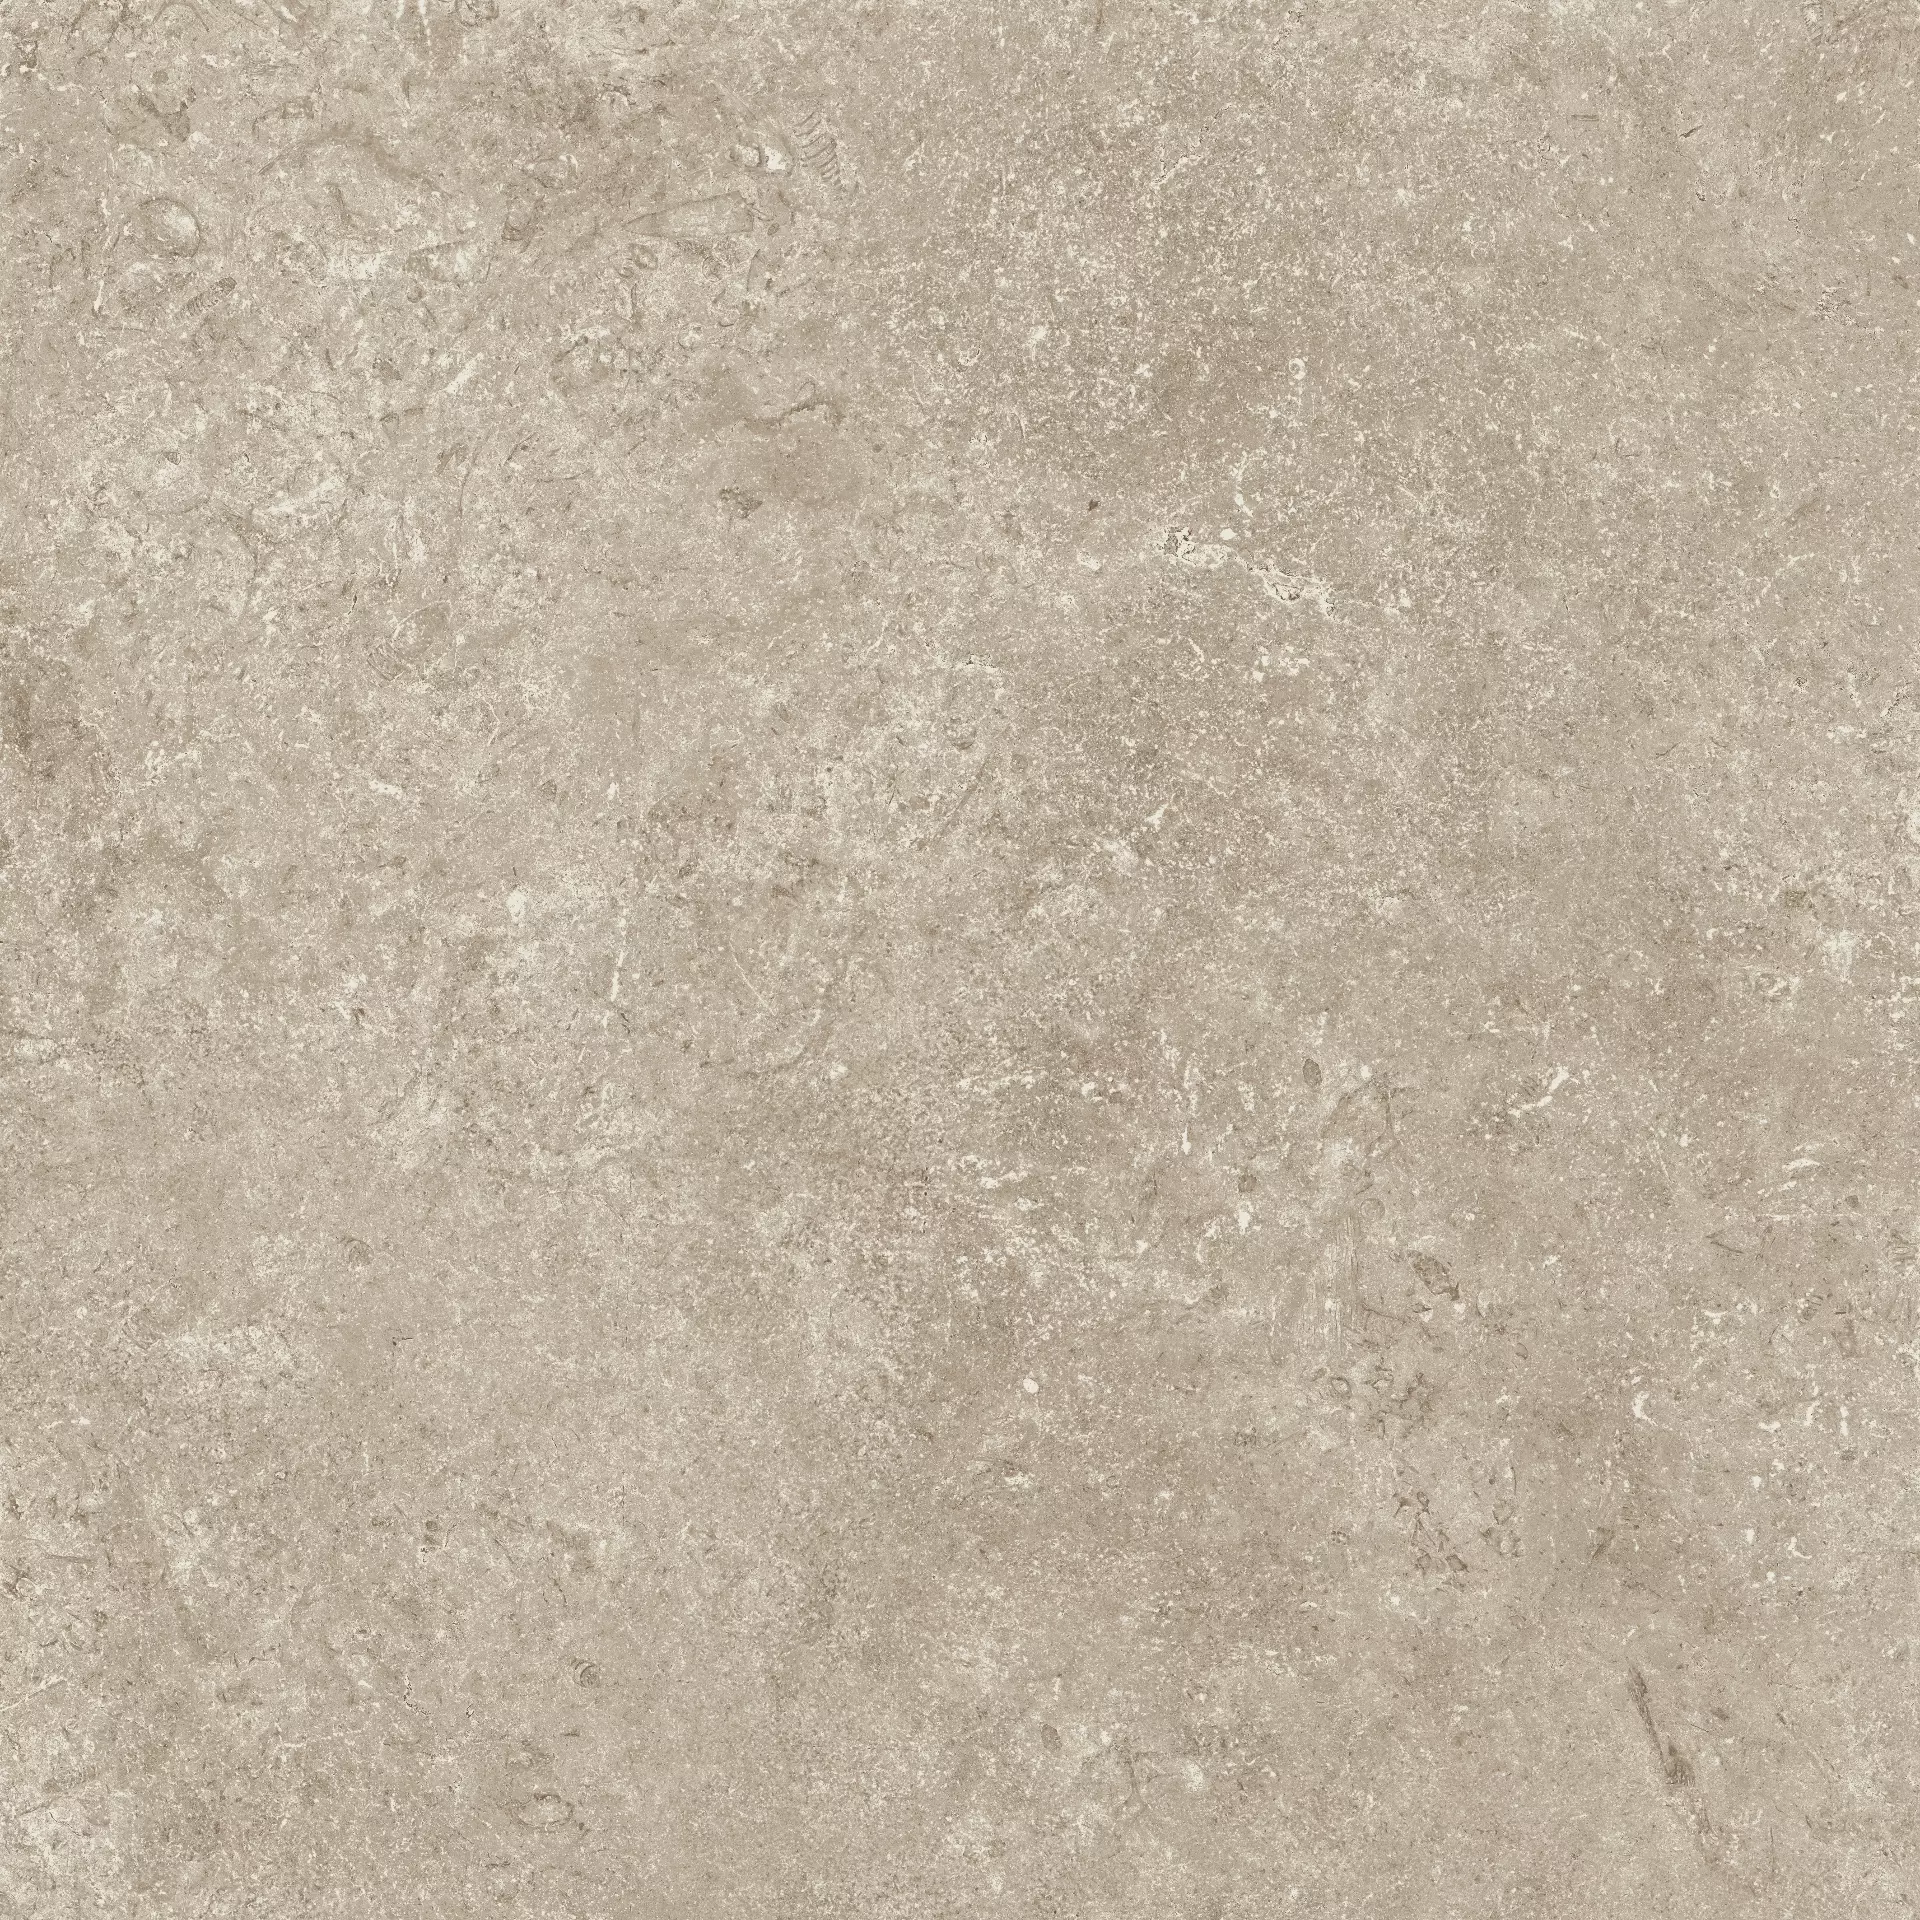 Cottodeste Secret Stone Shadow Grey Naturale Protect EGWSS30 60x60cm rectified 14mm